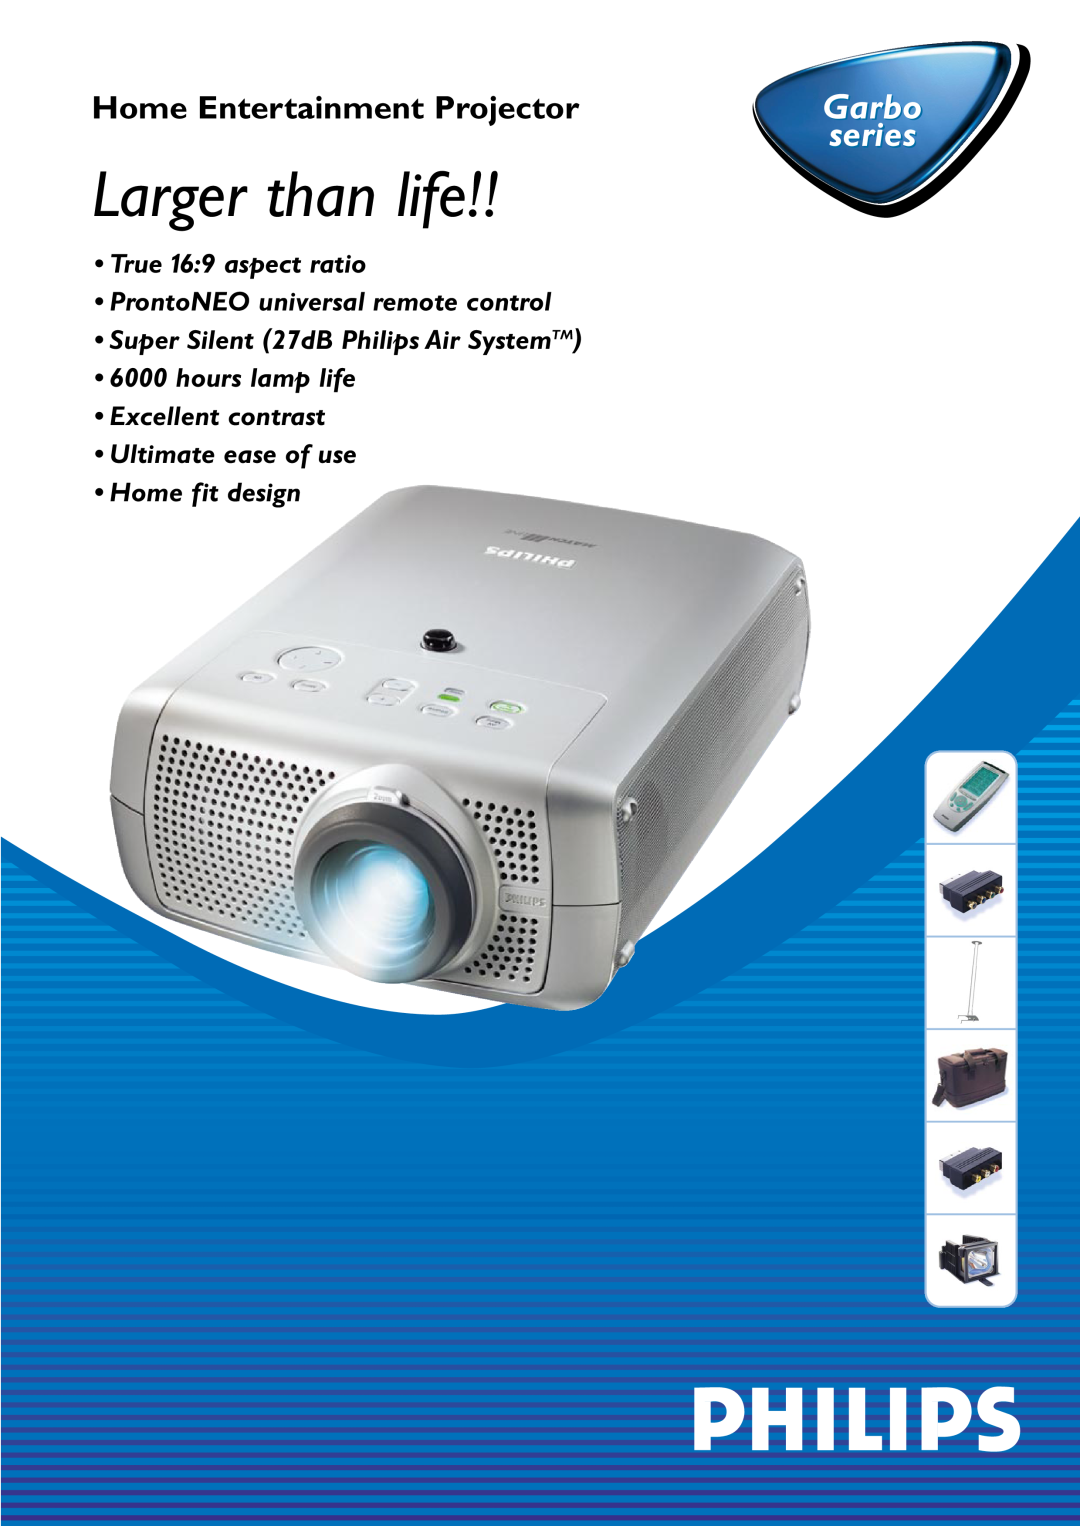 Philips Garbo Series manual Larger than life, Home Entertainment Projector, series, True 16 9 aspect ratio 